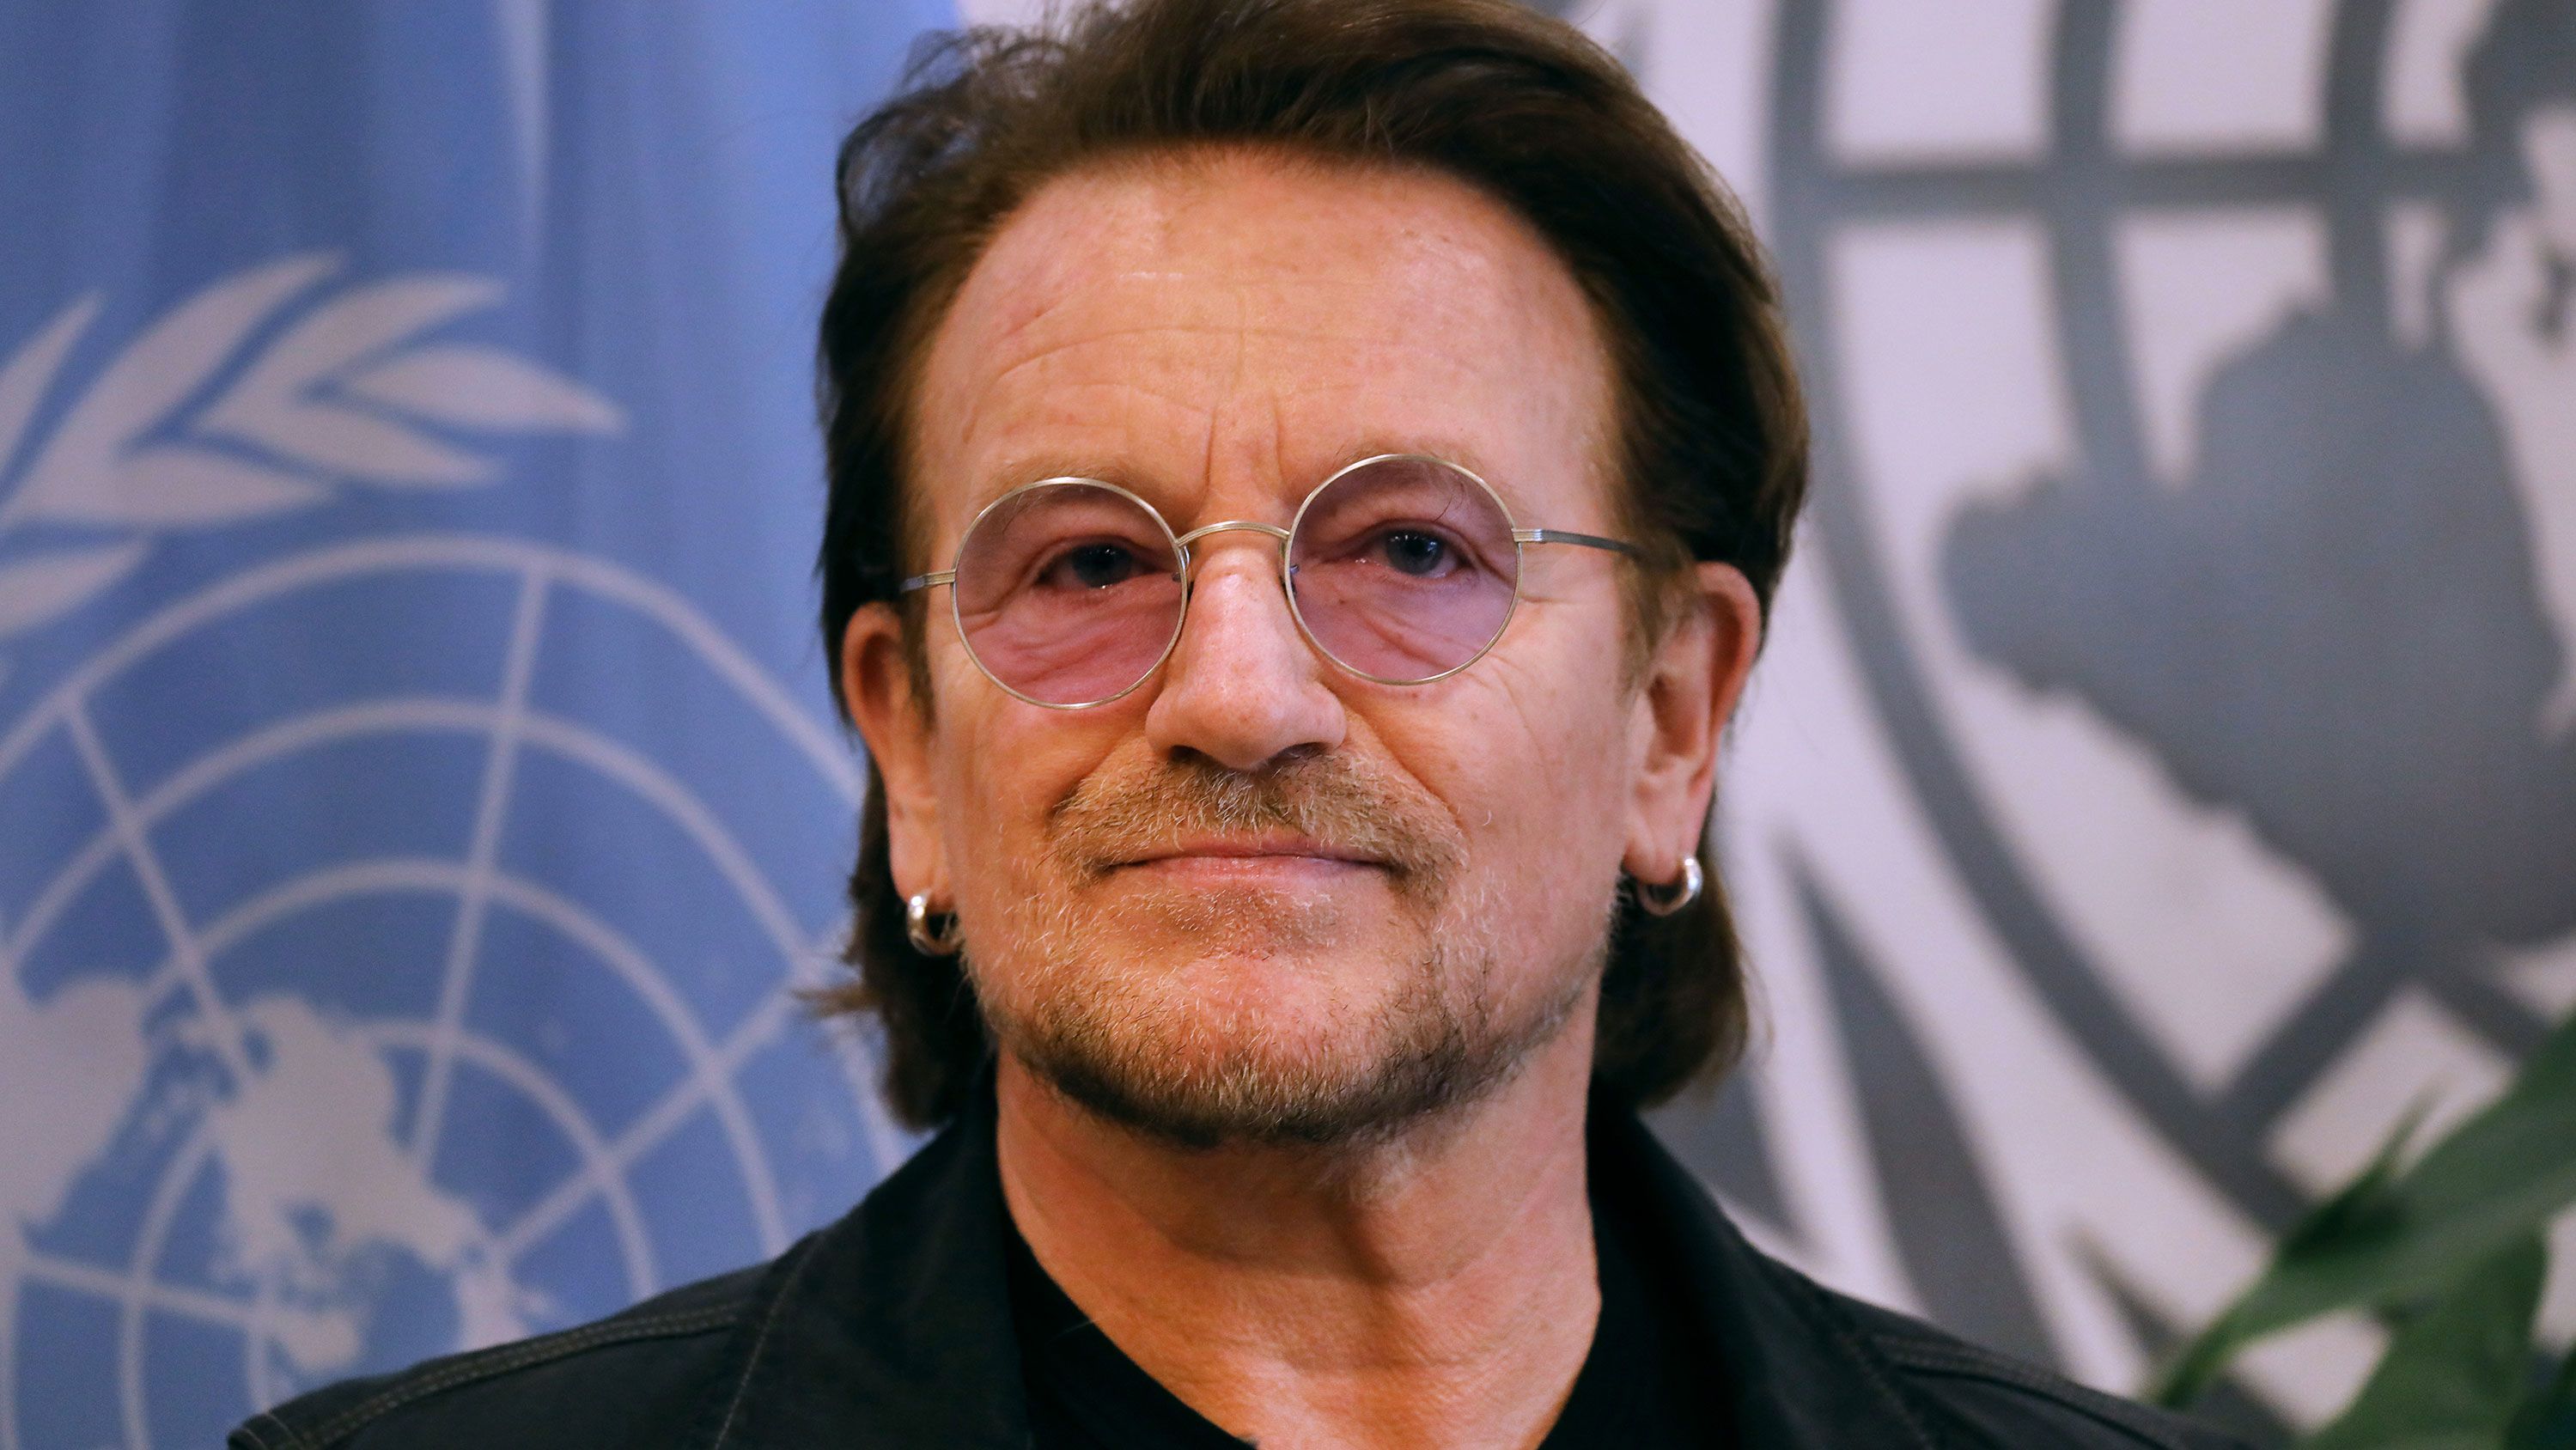 Bono's new song, 'Let Your Love Be Known," is dedicated to people isolated by coronavirus.